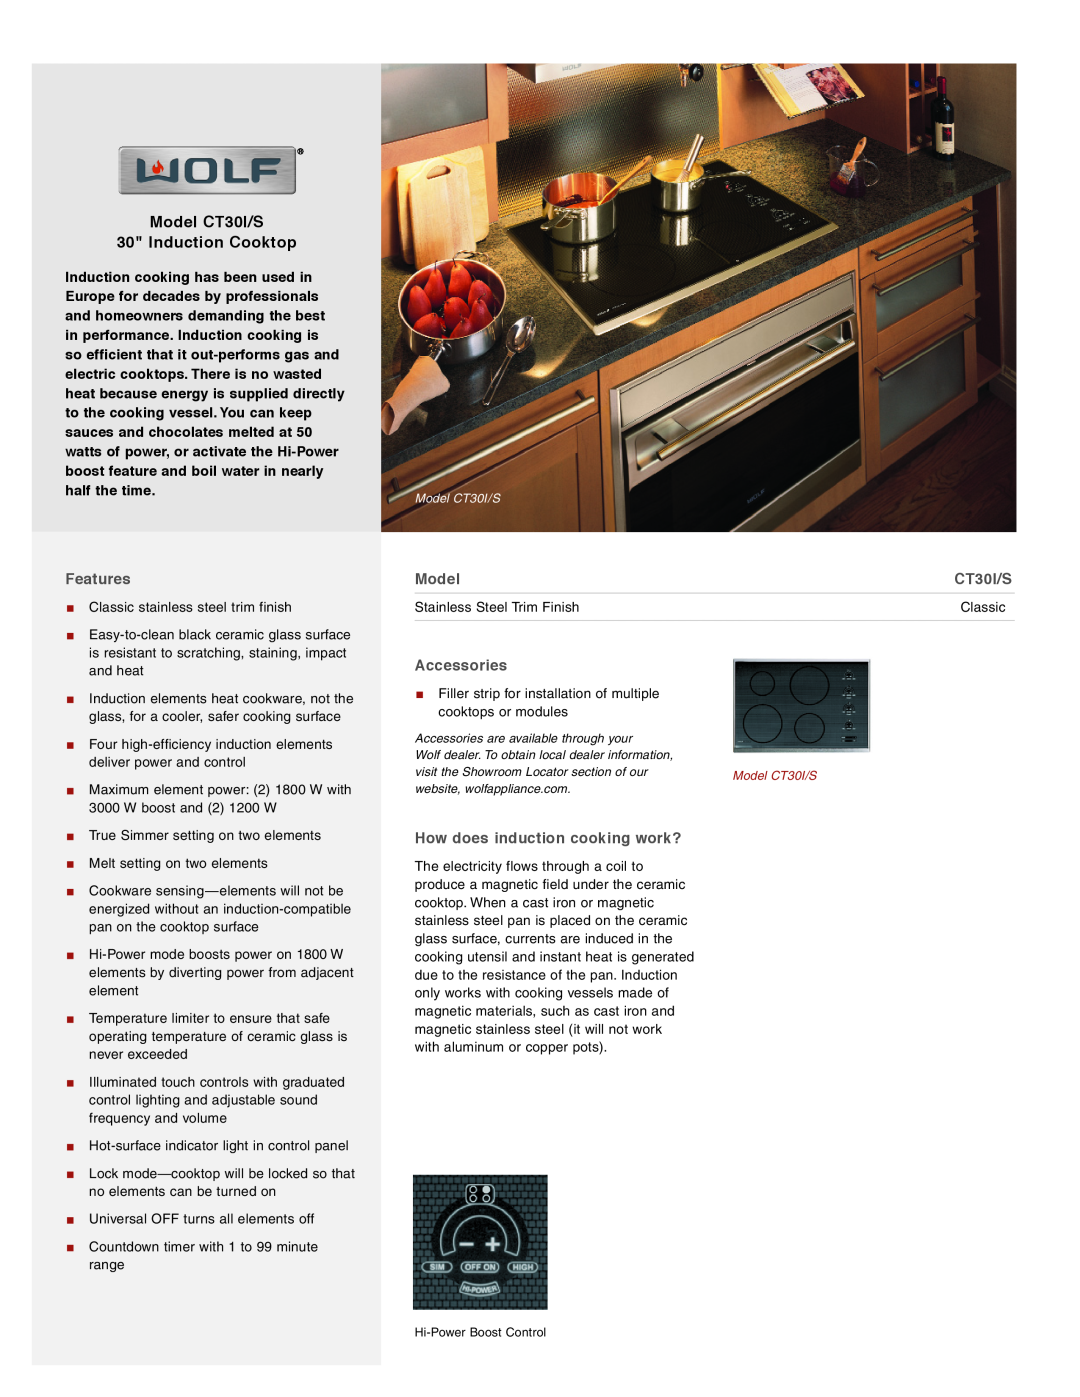 Wolf Appliance Company manual Model CT30I/S 30 Induction Cooktop, Features, Accessories 